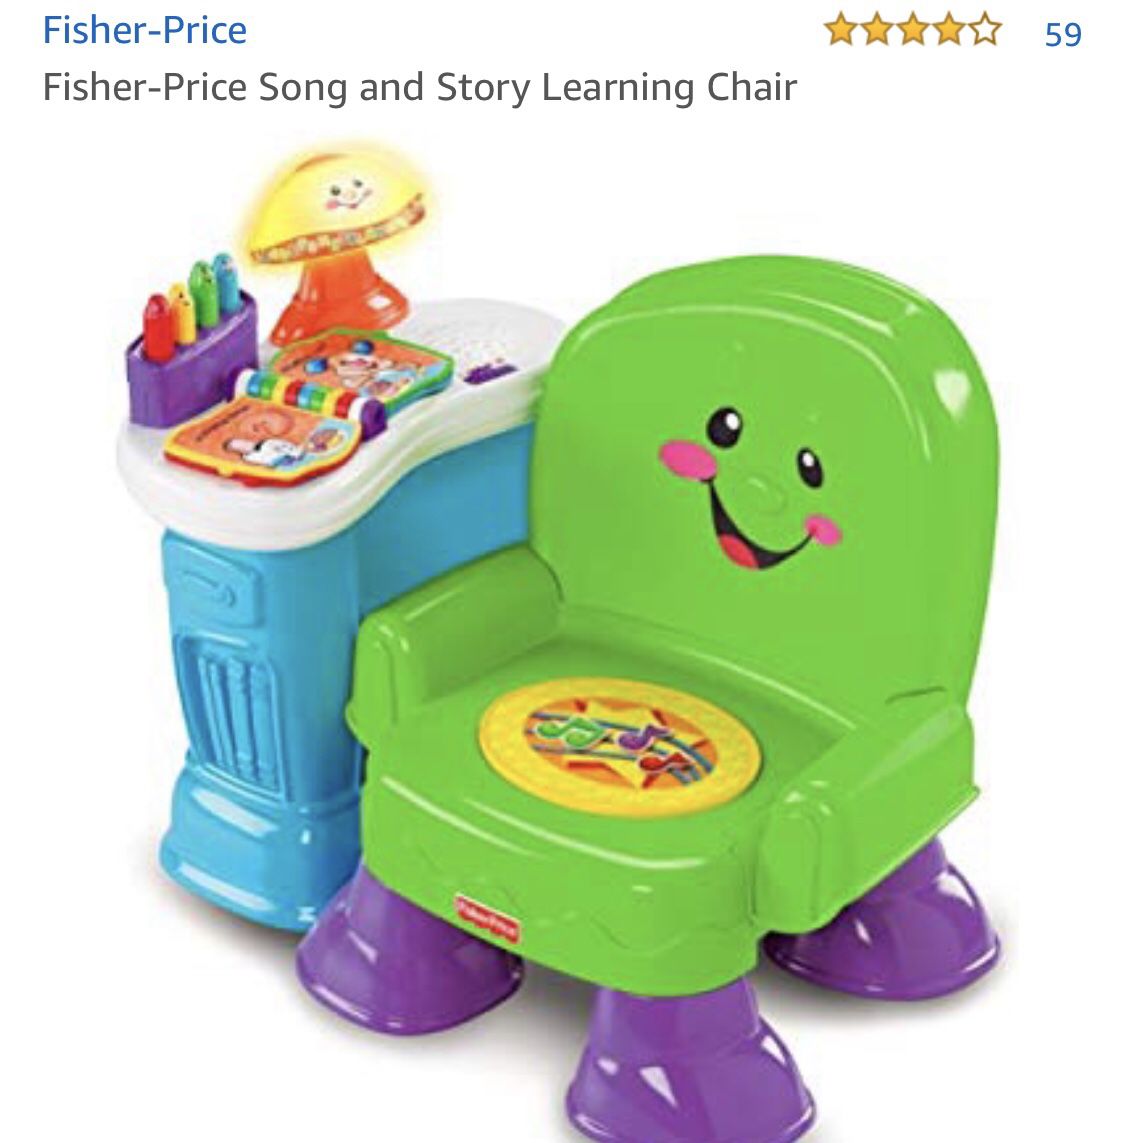 Fisher price music activity chair for kids!